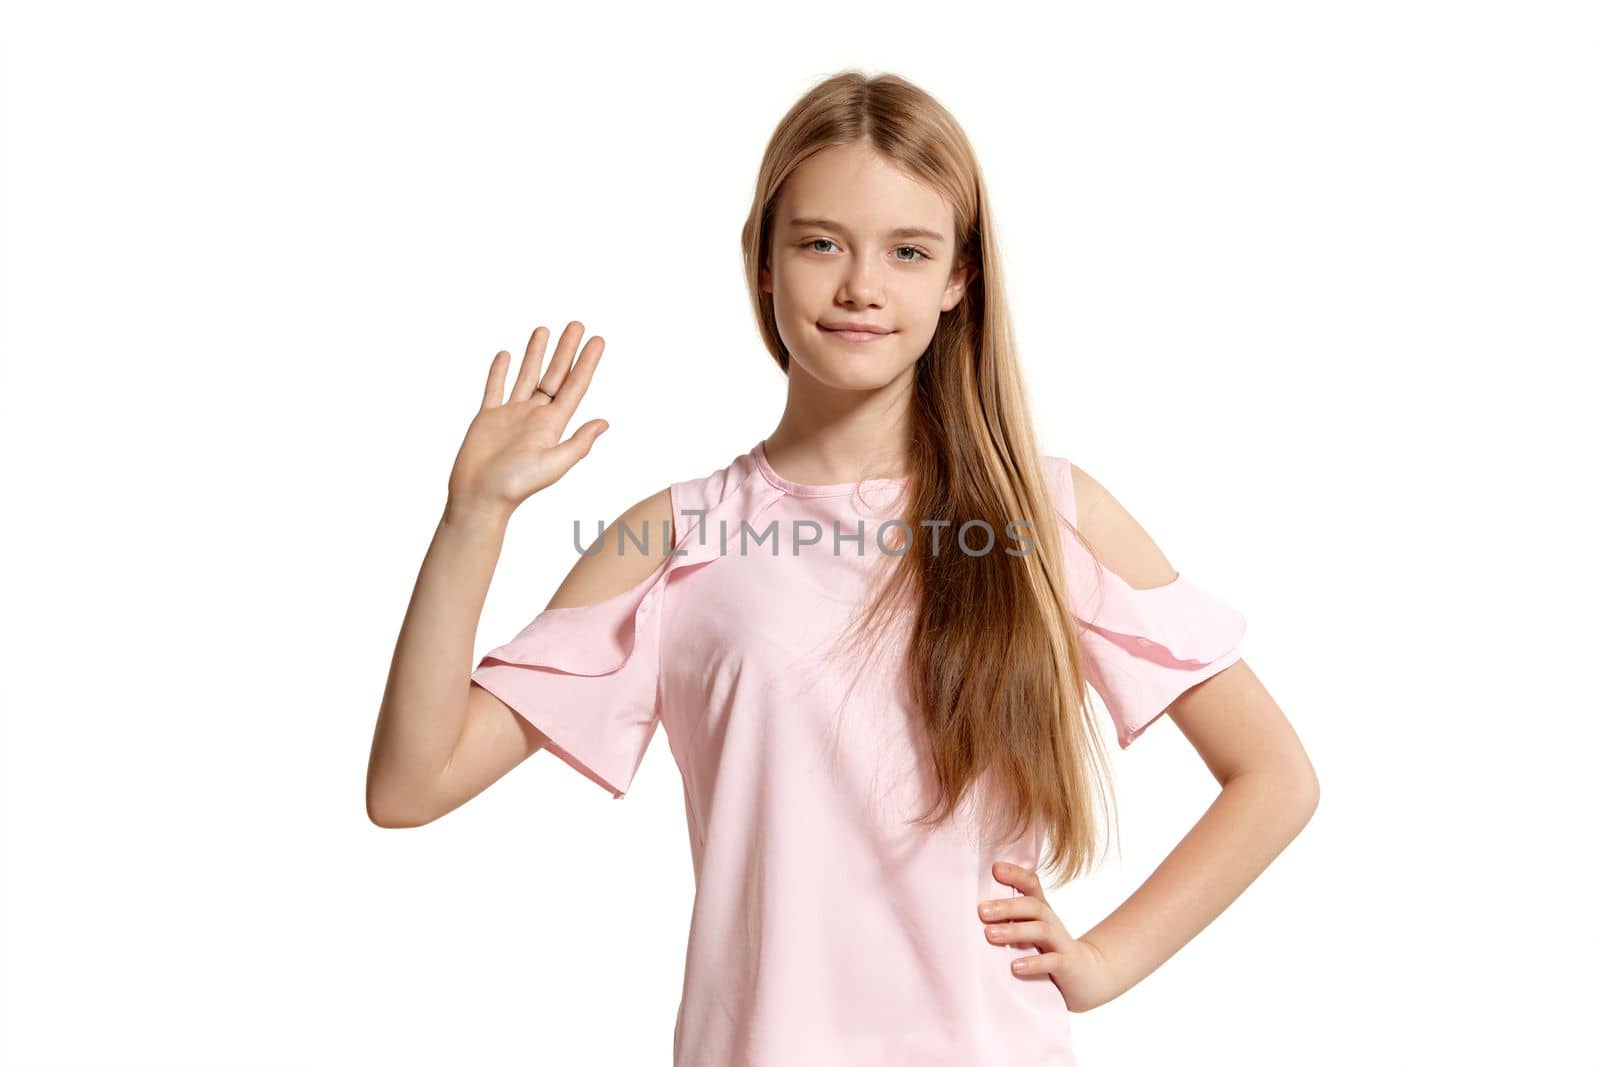 Studio portrait of a lovely blonde adolescent in a pink t-shirt isolated on white background in various poses. She expresses different emotions posing right in front of the camera, smiling and waving her hand.